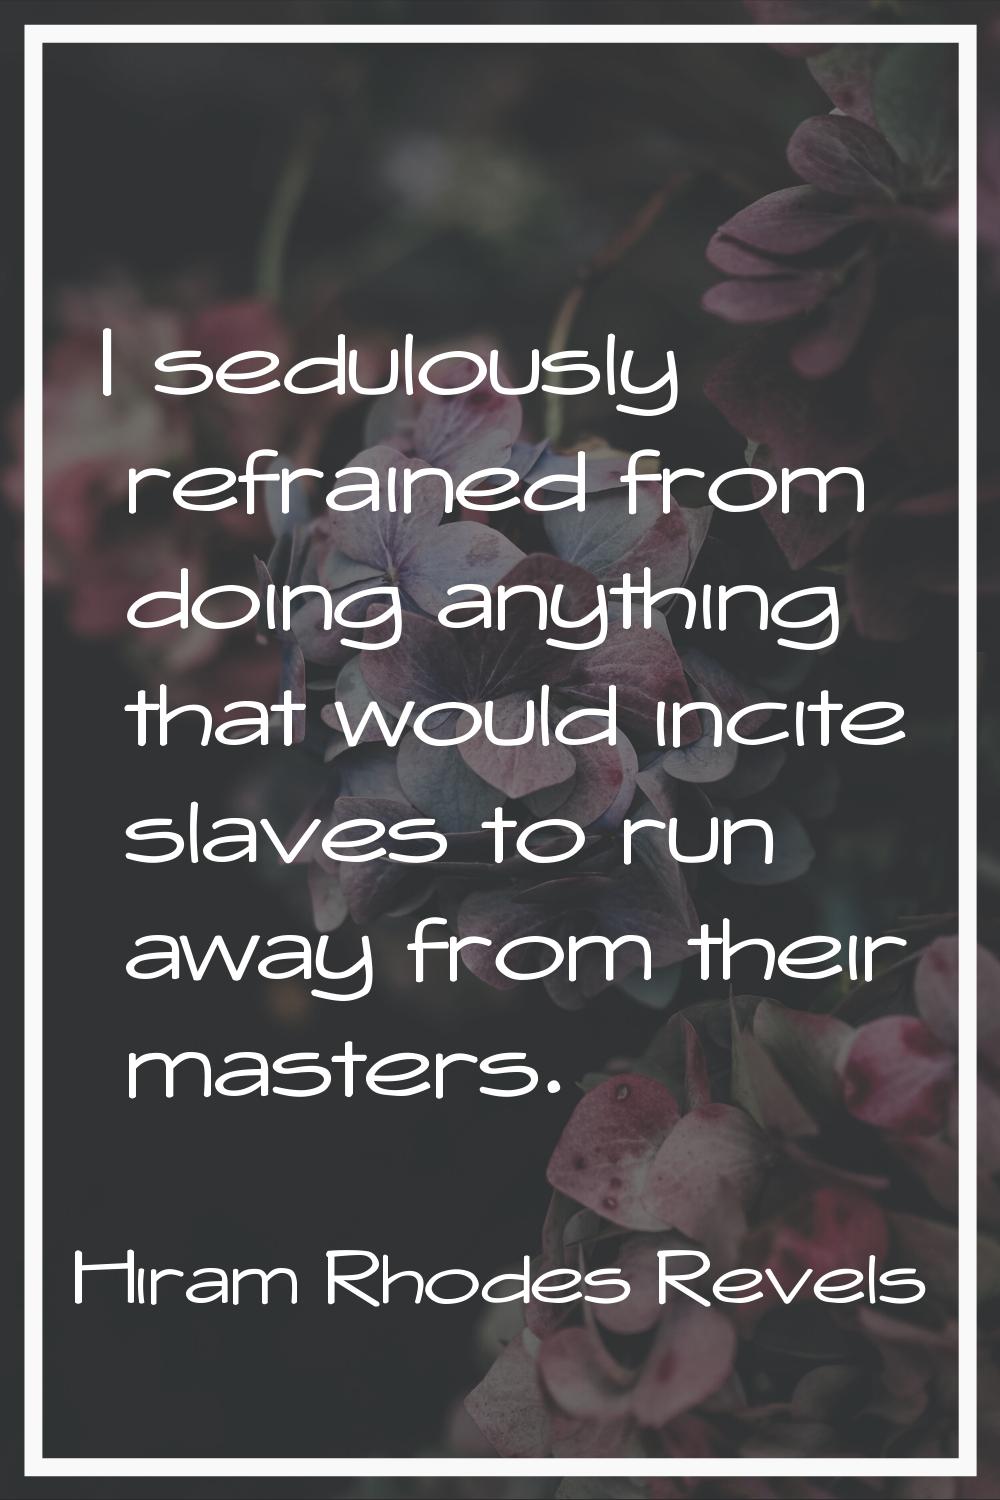 I sedulously refrained from doing anything that would incite slaves to run away from their masters.